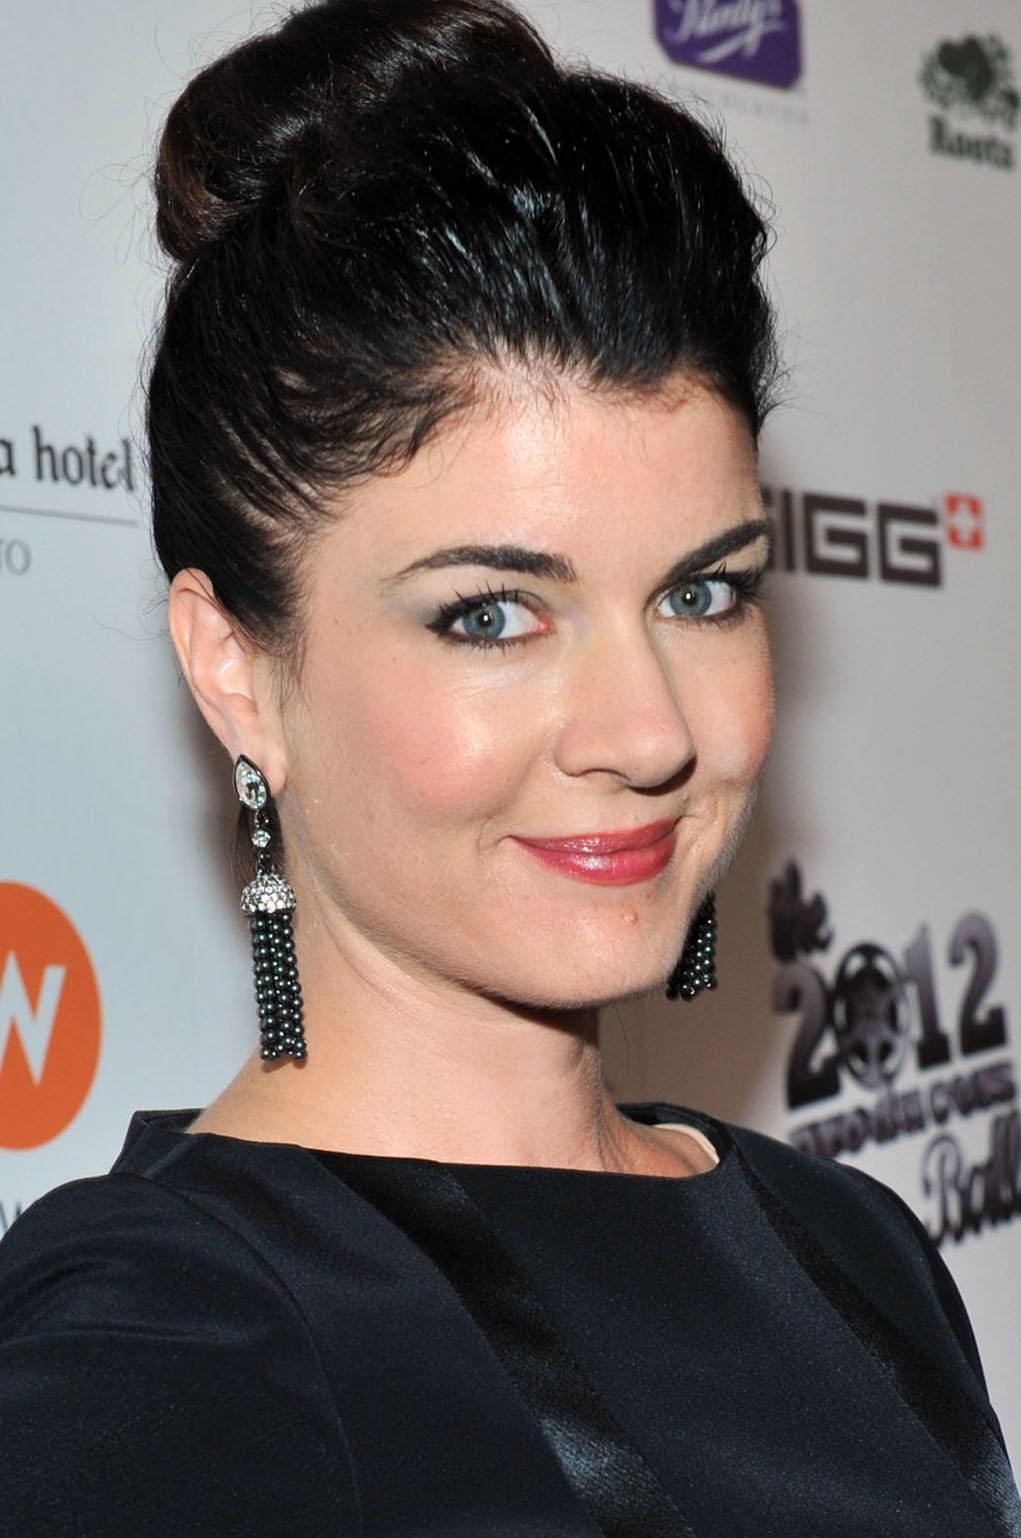 70+ Hot Pictures Of Gabrielle Miller Are Here To Take Your Breath Away 516